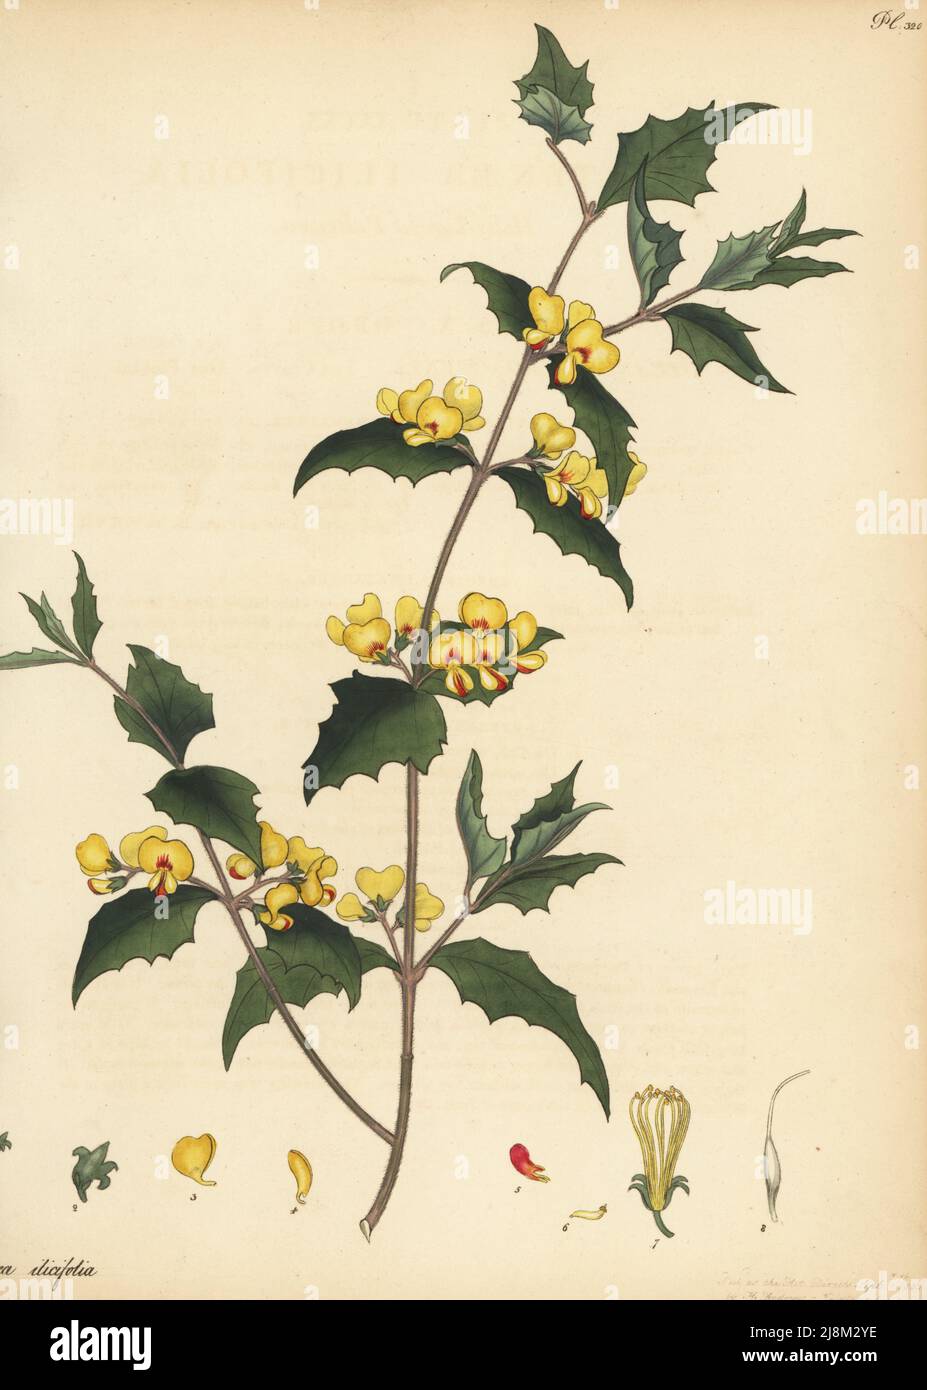 Prickly shaggy-pea, Oxylobium trilobatum. Holly-leaved pultenaea, Pultenaea ilicifolia. From New Holland, Australia, in Lee and Kennedy's Hammersmith Nursery. Copperplate engraving drawn, engraved and hand-coloured by Henry Andrews from his Botanical Register, Volume 5, self-published in Knightsbridge, London, 1803. Stock Photo